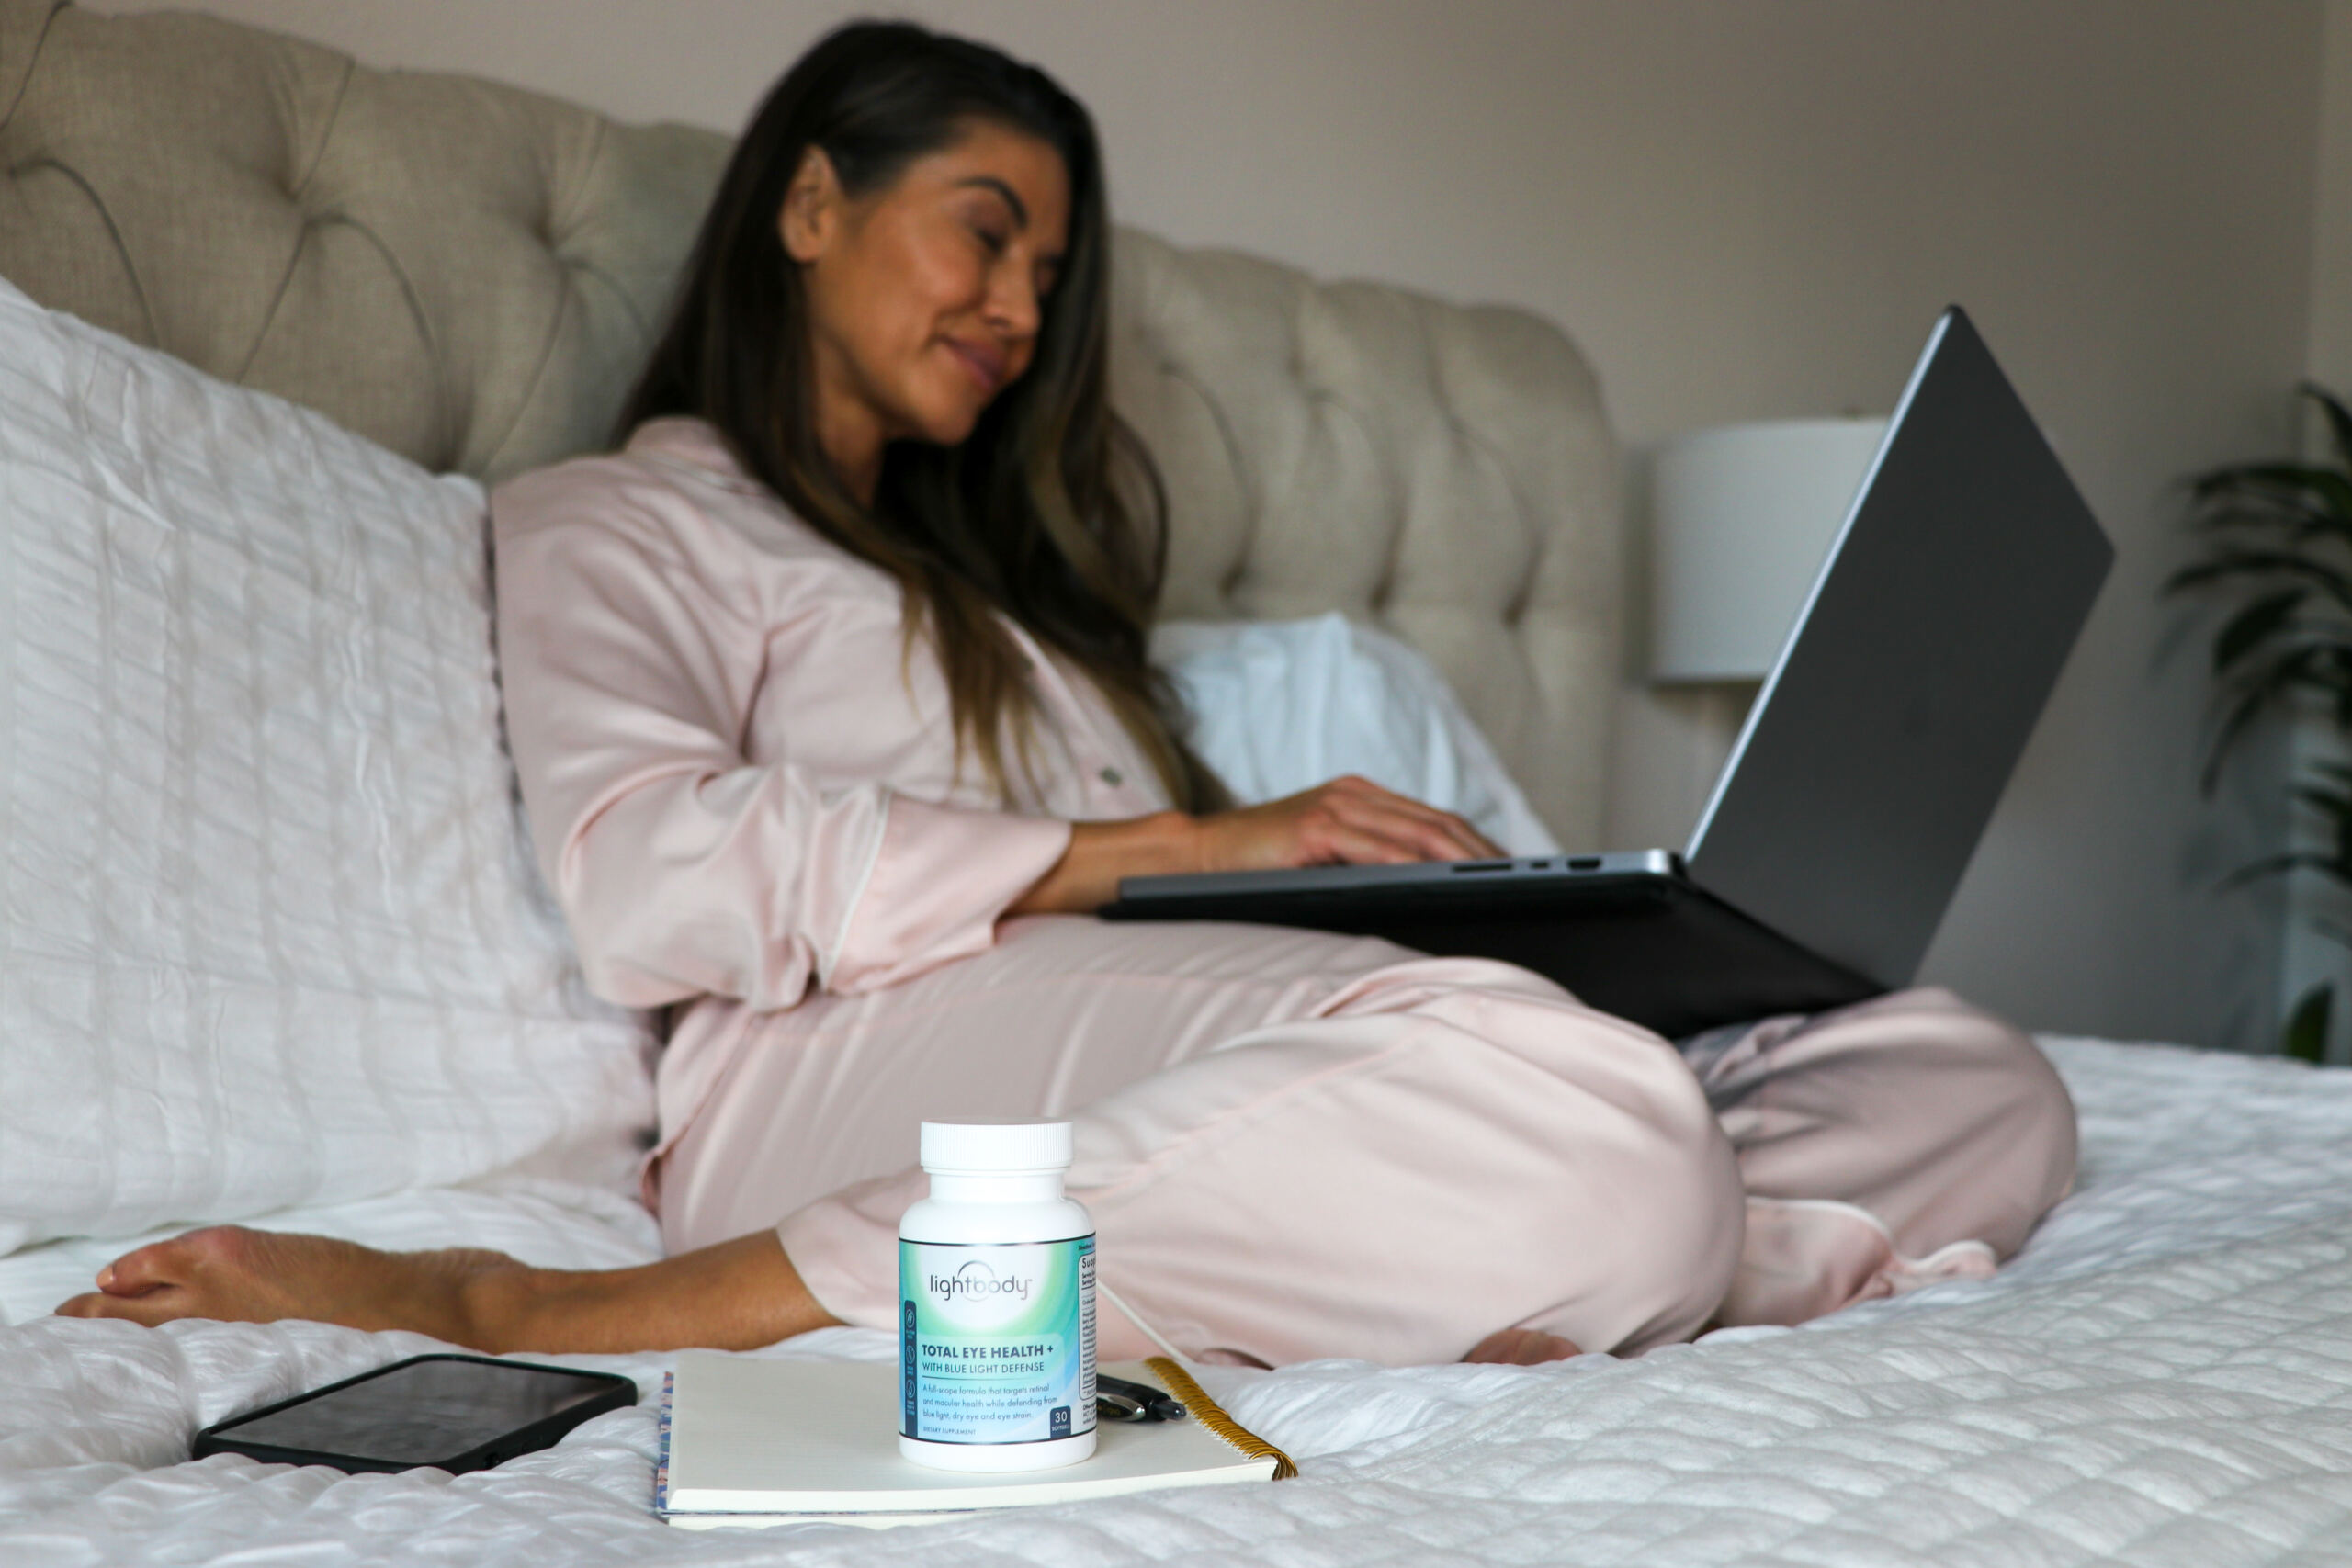 Woman sitting in bed, working on her laptop, with a bottle of supplements in the foreground - a photo illustrating a blog post trying to answer the question "Do eye health supplements work?"